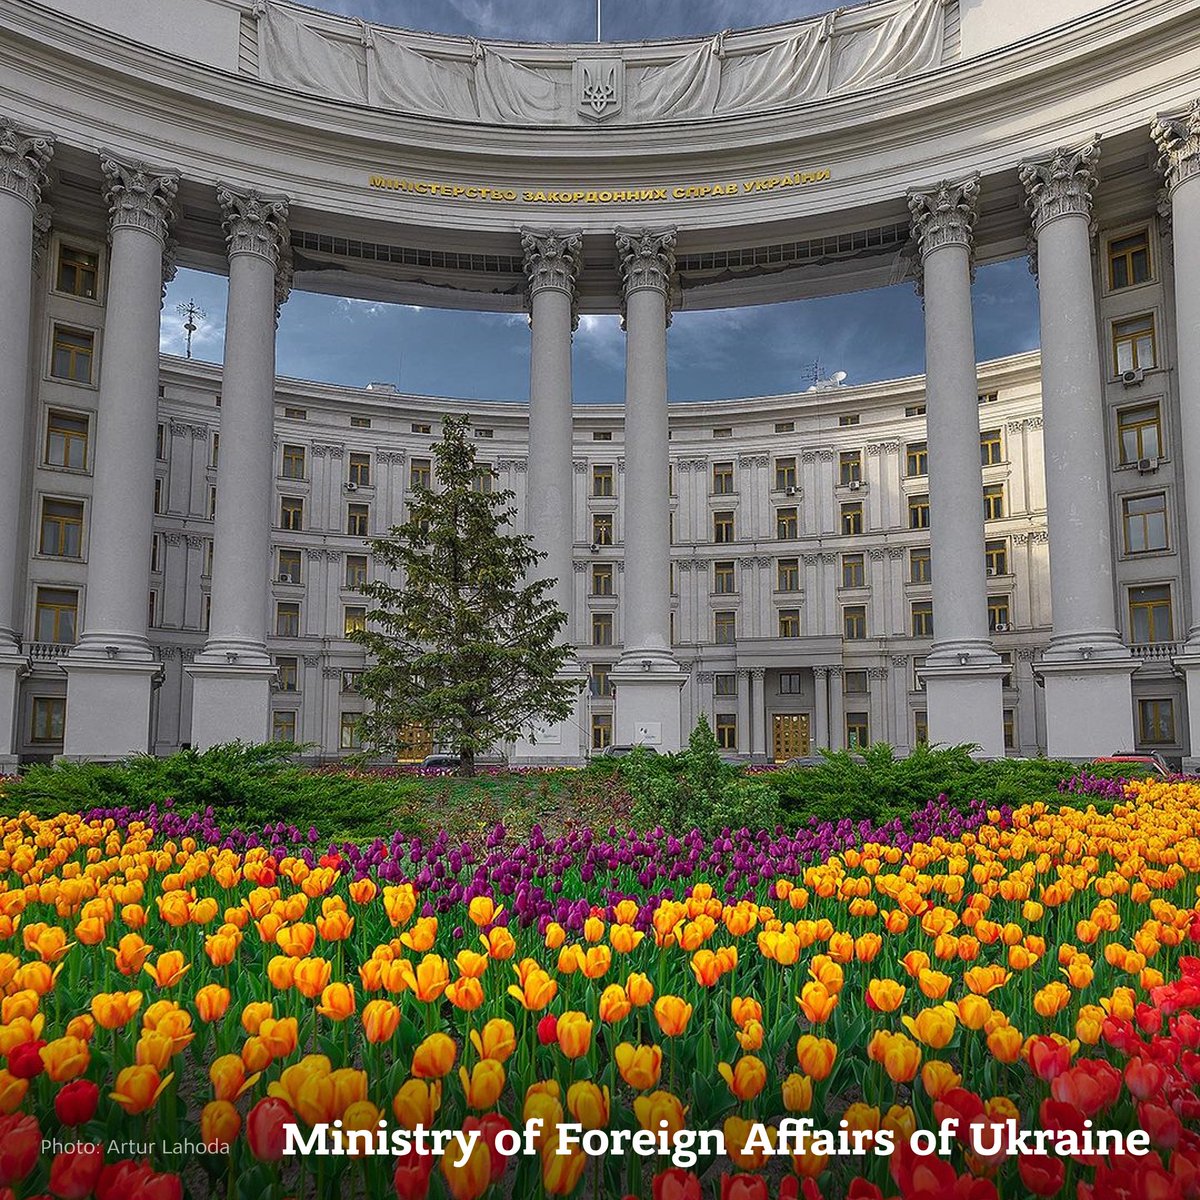 This is what #Ukraine's MFA main building looked like not long ago. Despite all the wartime challenges, Ukraine will endure and bloom even stronger, even more than these tulips. A peaceful and prosperous future is #WhatWeAreFightingFor